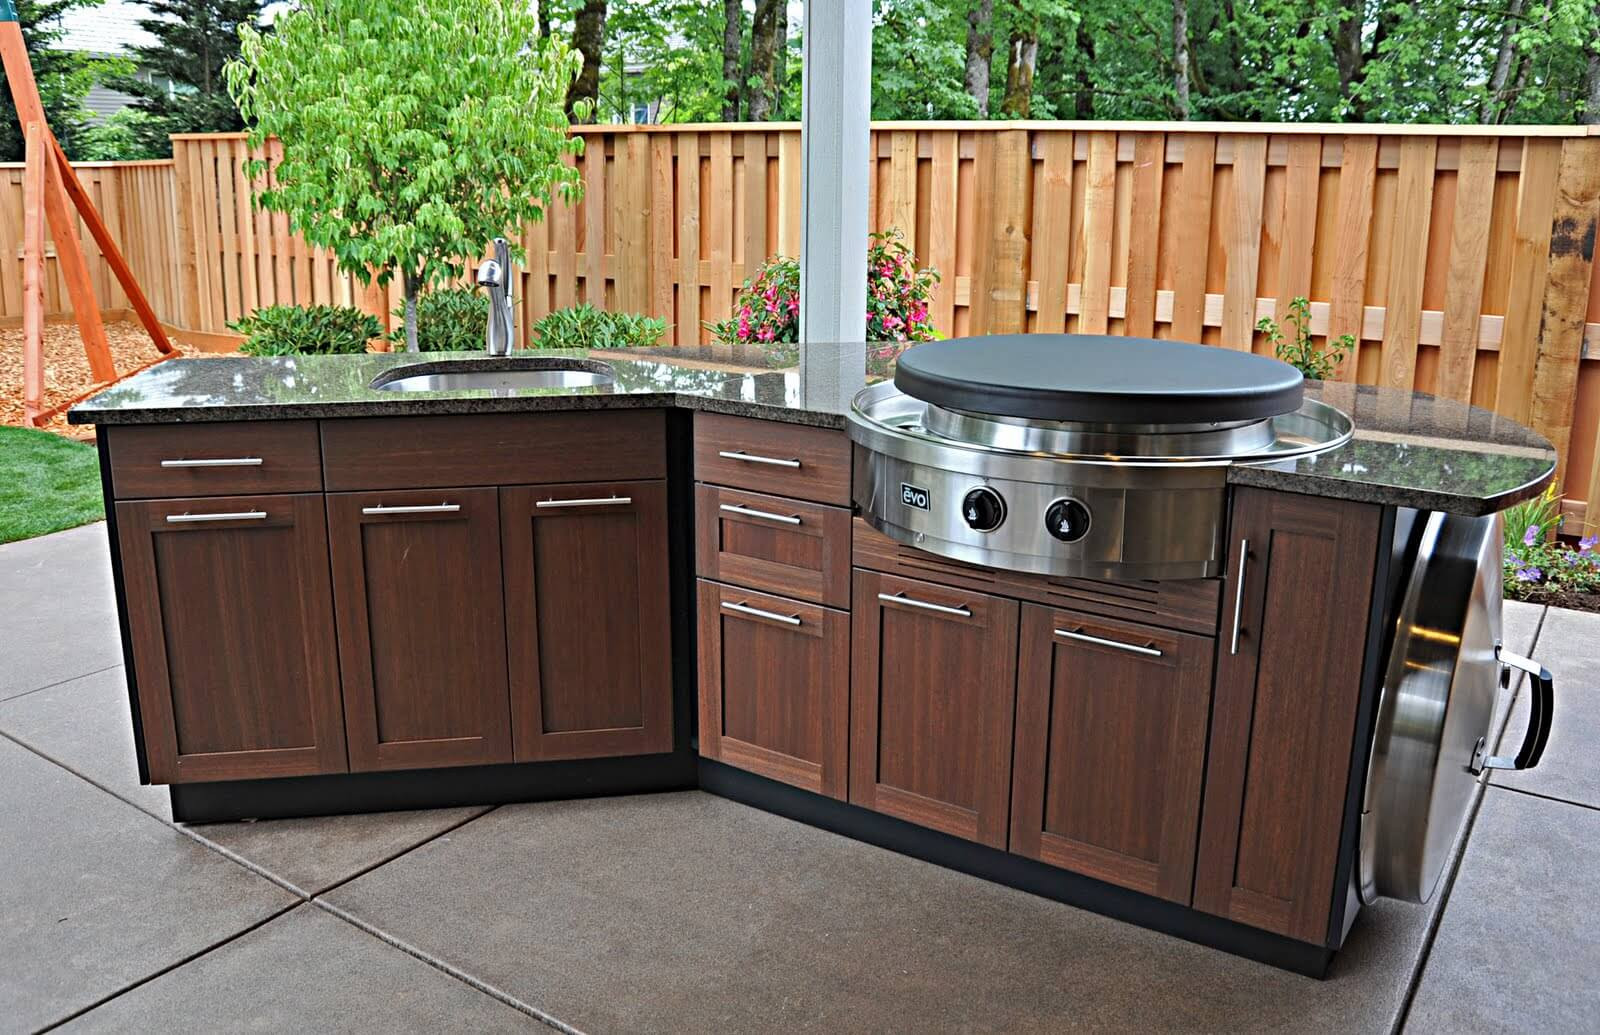 Build Outdoor Kitchen Cabinet
 Ways to Choose Prefabricated Outdoor Kitchen Kits